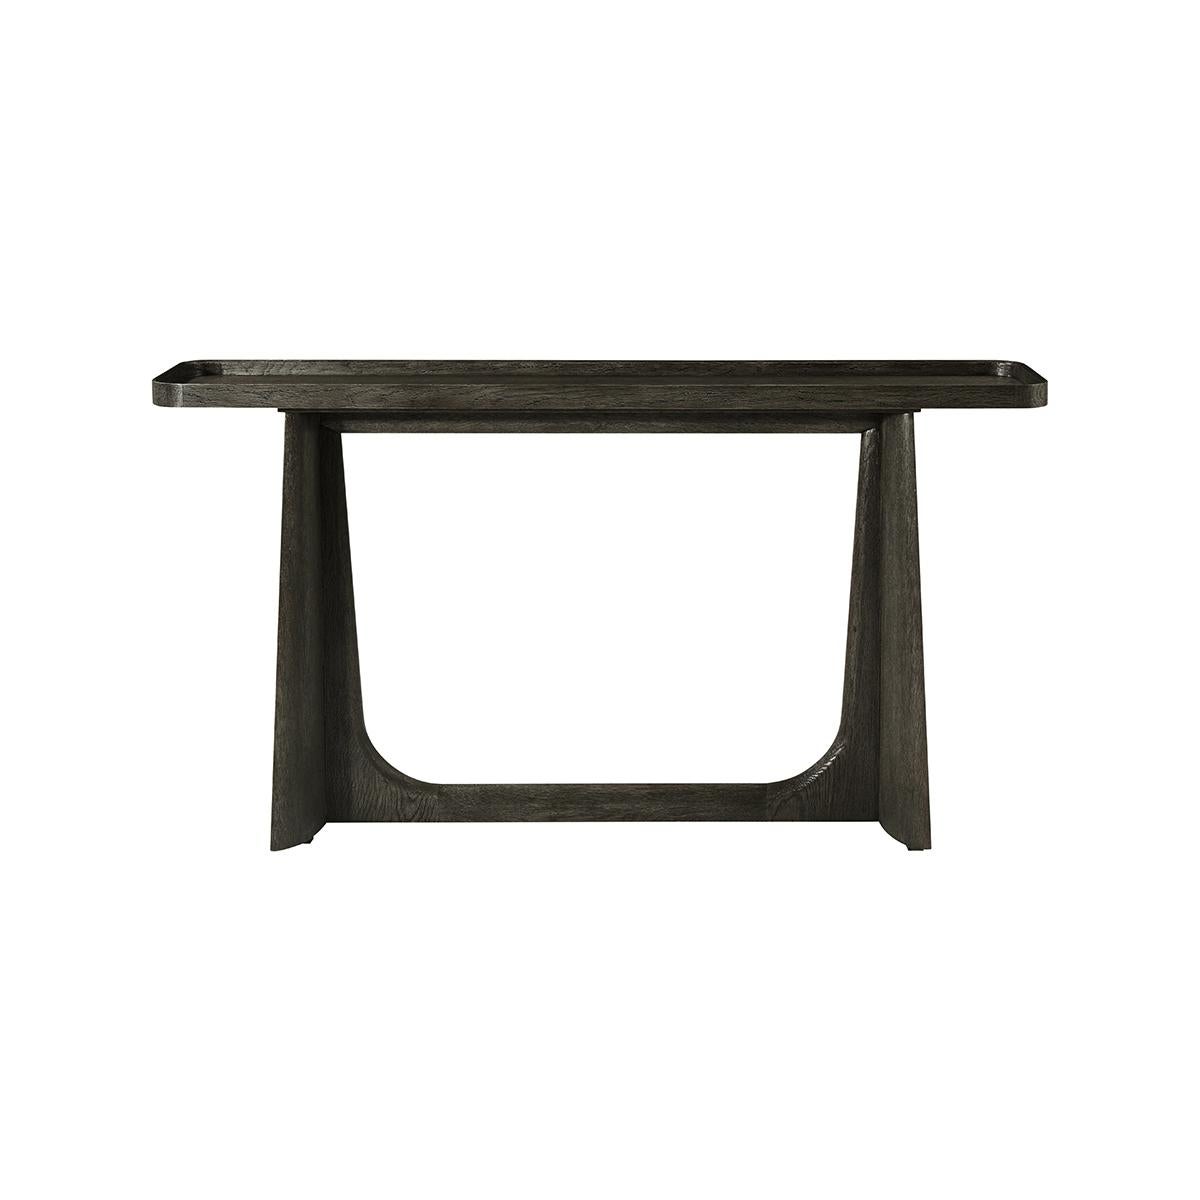 Featuring a wire-brushed white oak in our dark Charcoal oak finish. With deep dish galleried top raised on trapezoidal form trestle ends with a stretcher.

Dimensions: 60